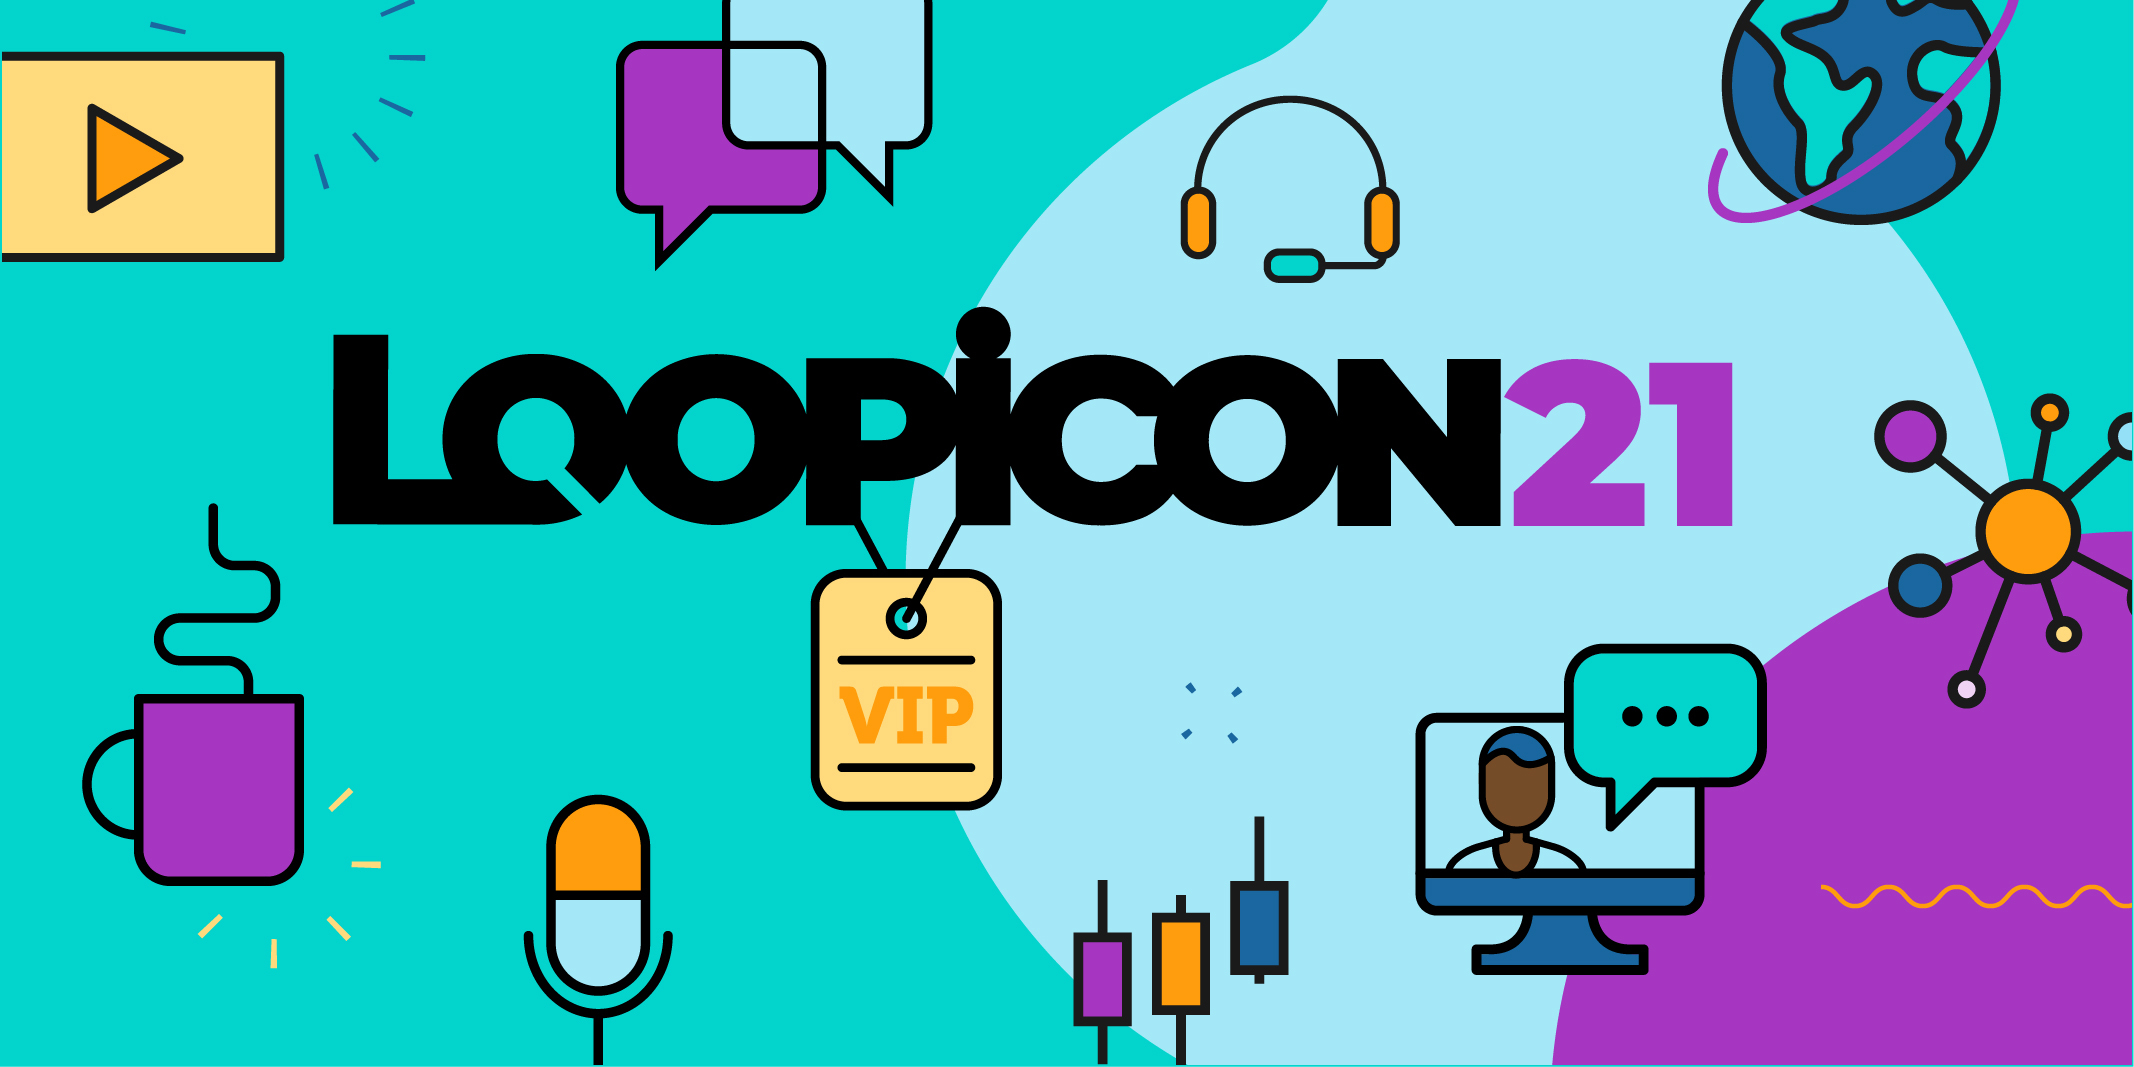 Loopicon 2021—the top conference for the RFP response community.